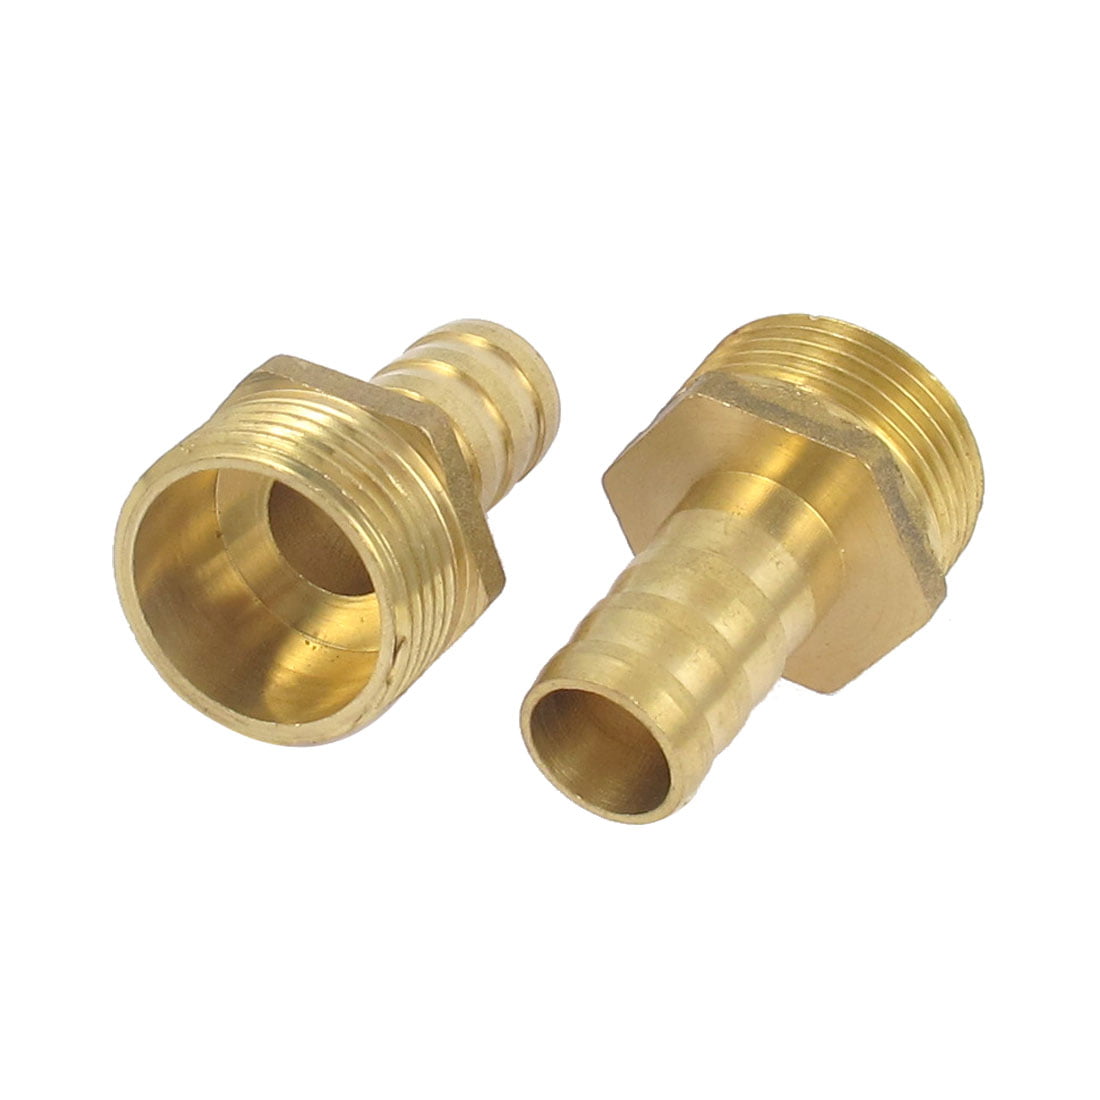 Solid Brass BSP Reducing Male Female Thread Straight Coupler Fitting Connector 